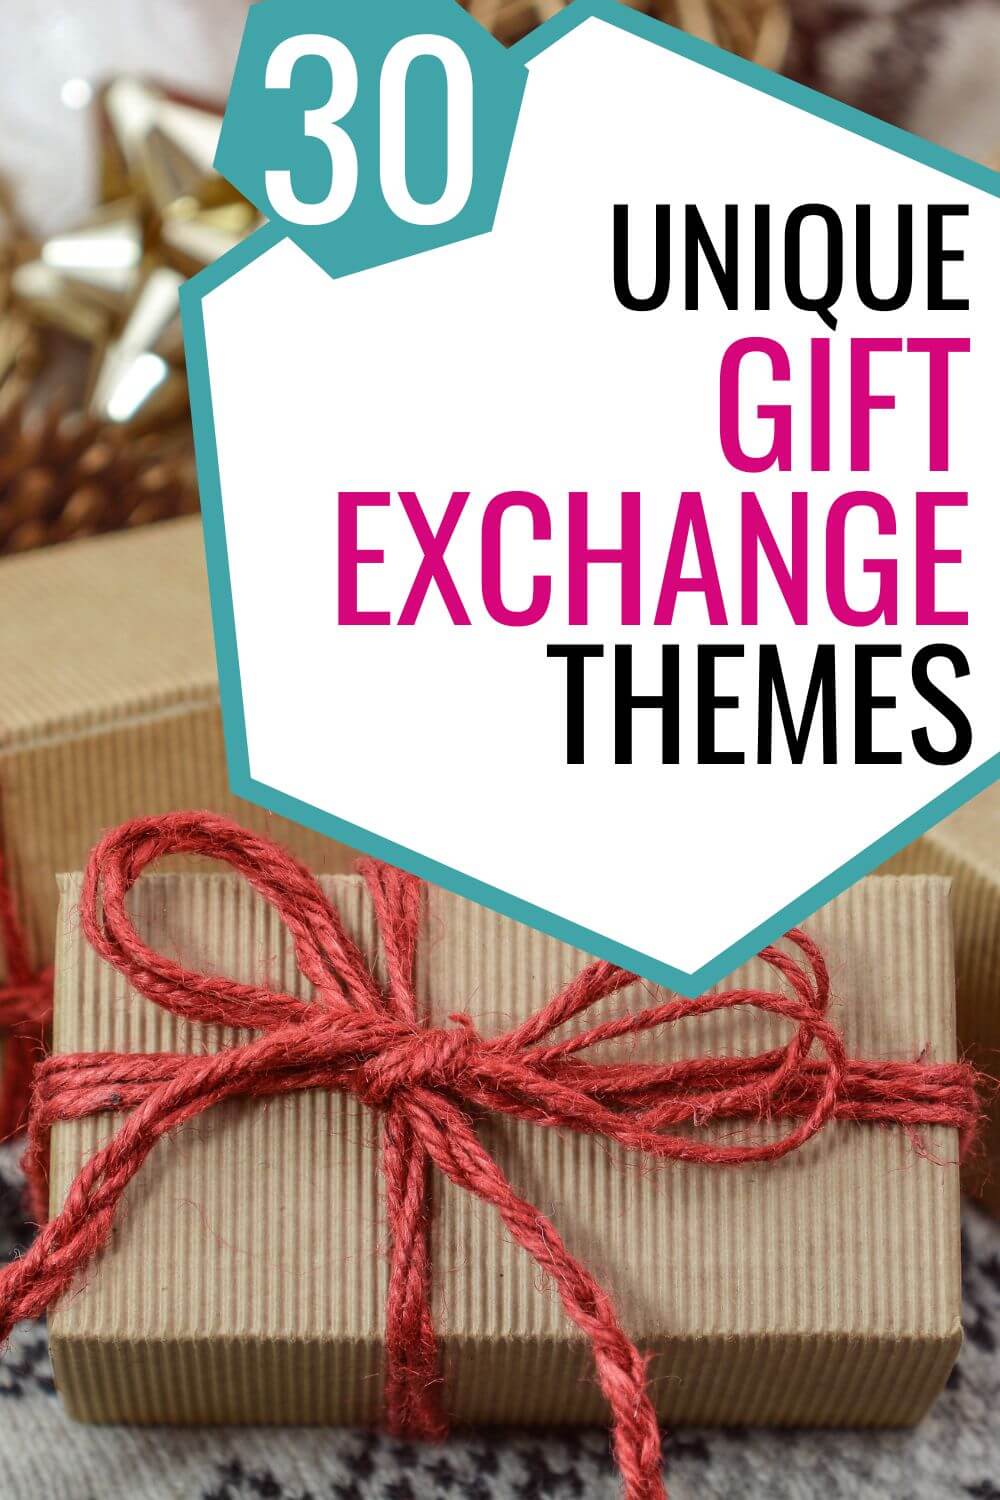 Picture of gifts with text that reads 30 unique gift exchange themes